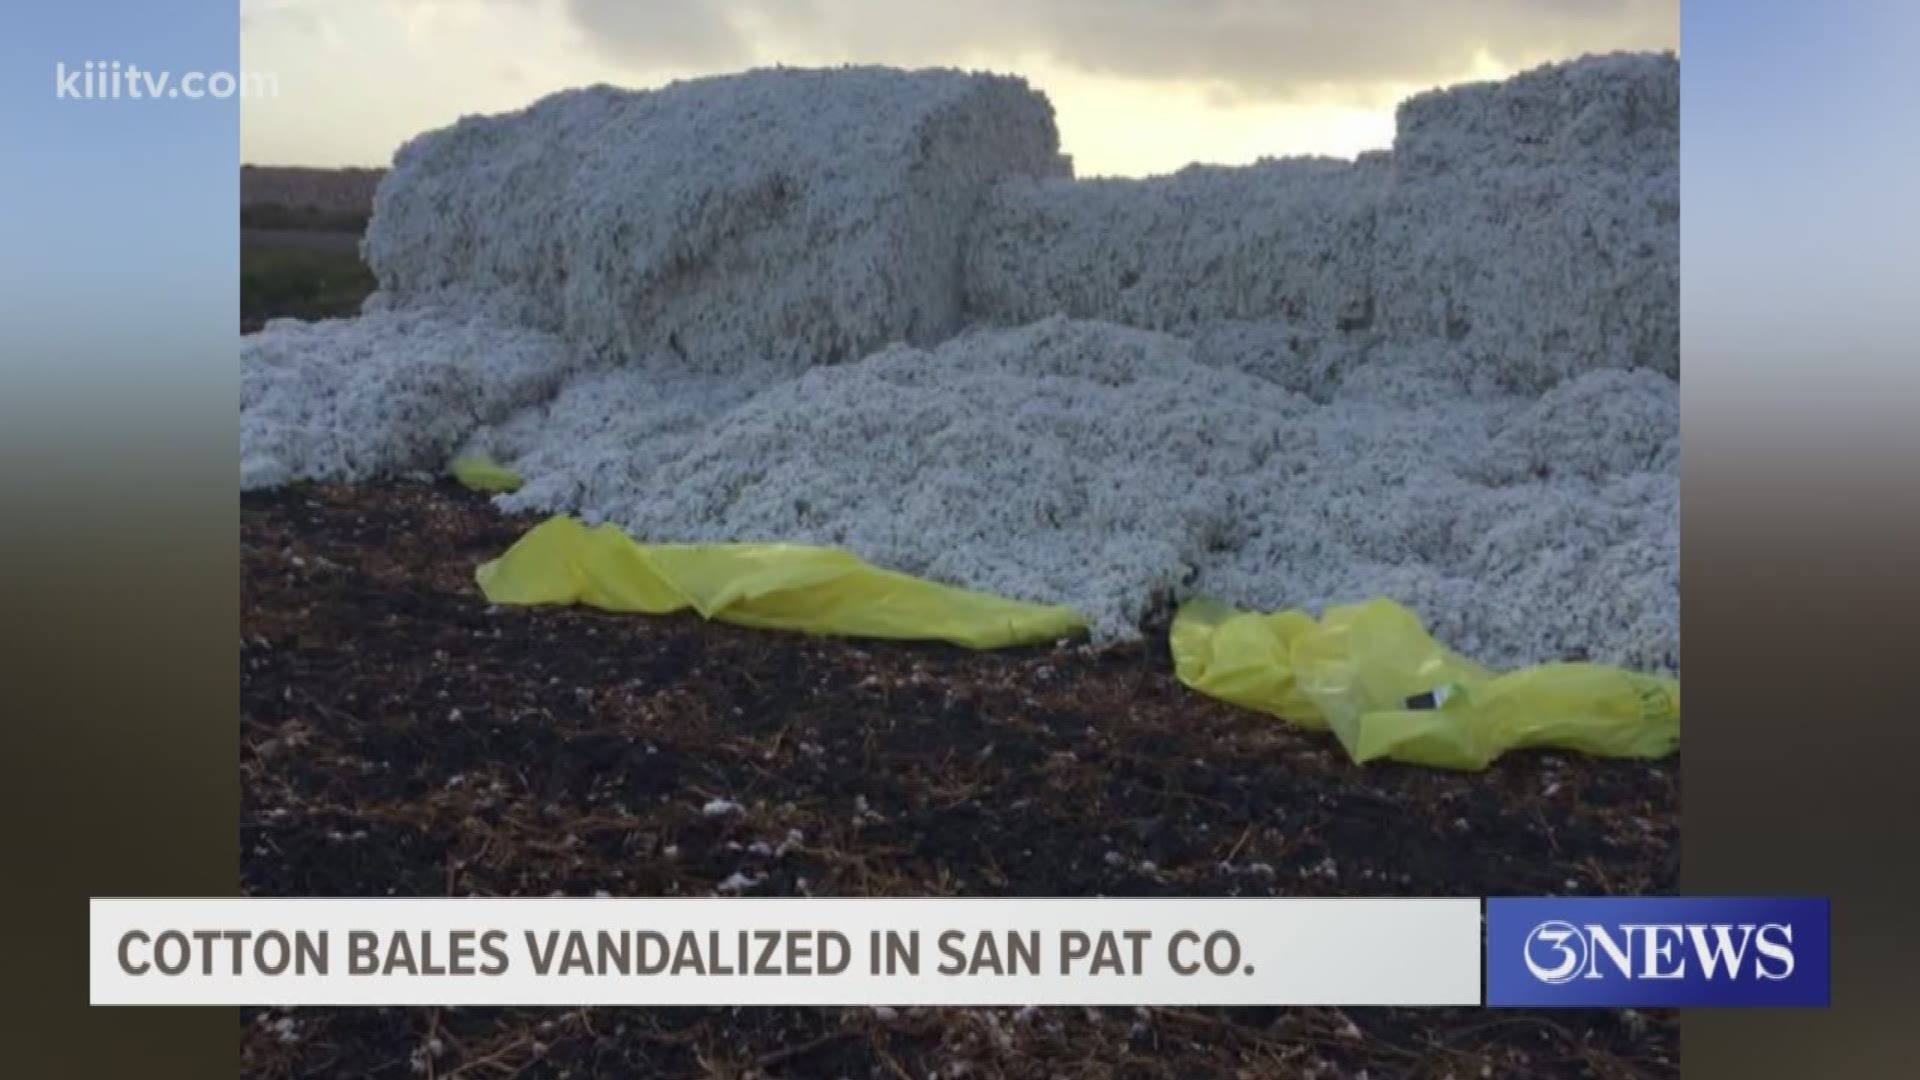 Surrounding areas woke up to cotton bales ready for transport, cut in half, and left open all over the fields